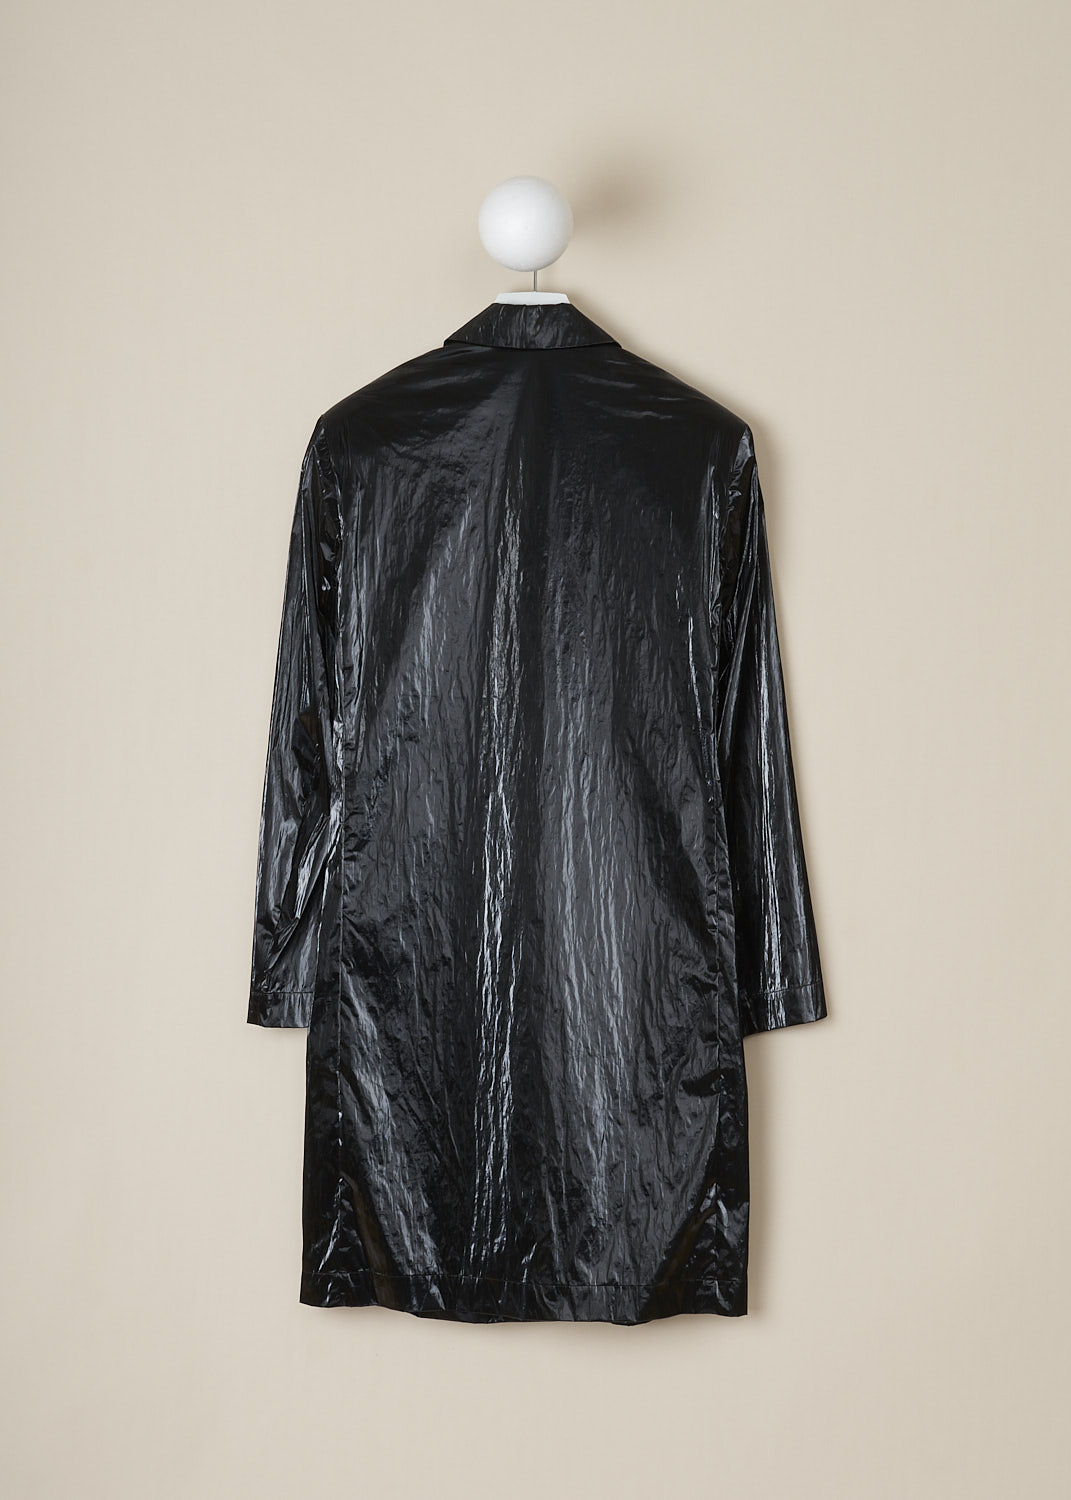 DRIES VAN NOTEN, GLOSSY BLACK COAT, ROXAN_2158_WW_COAT_BLA, Black, Back, This glossy black coat features a spread collar, a front button closure and padded shoulders. The coat has slanted pockets. The hemline is straight.  
